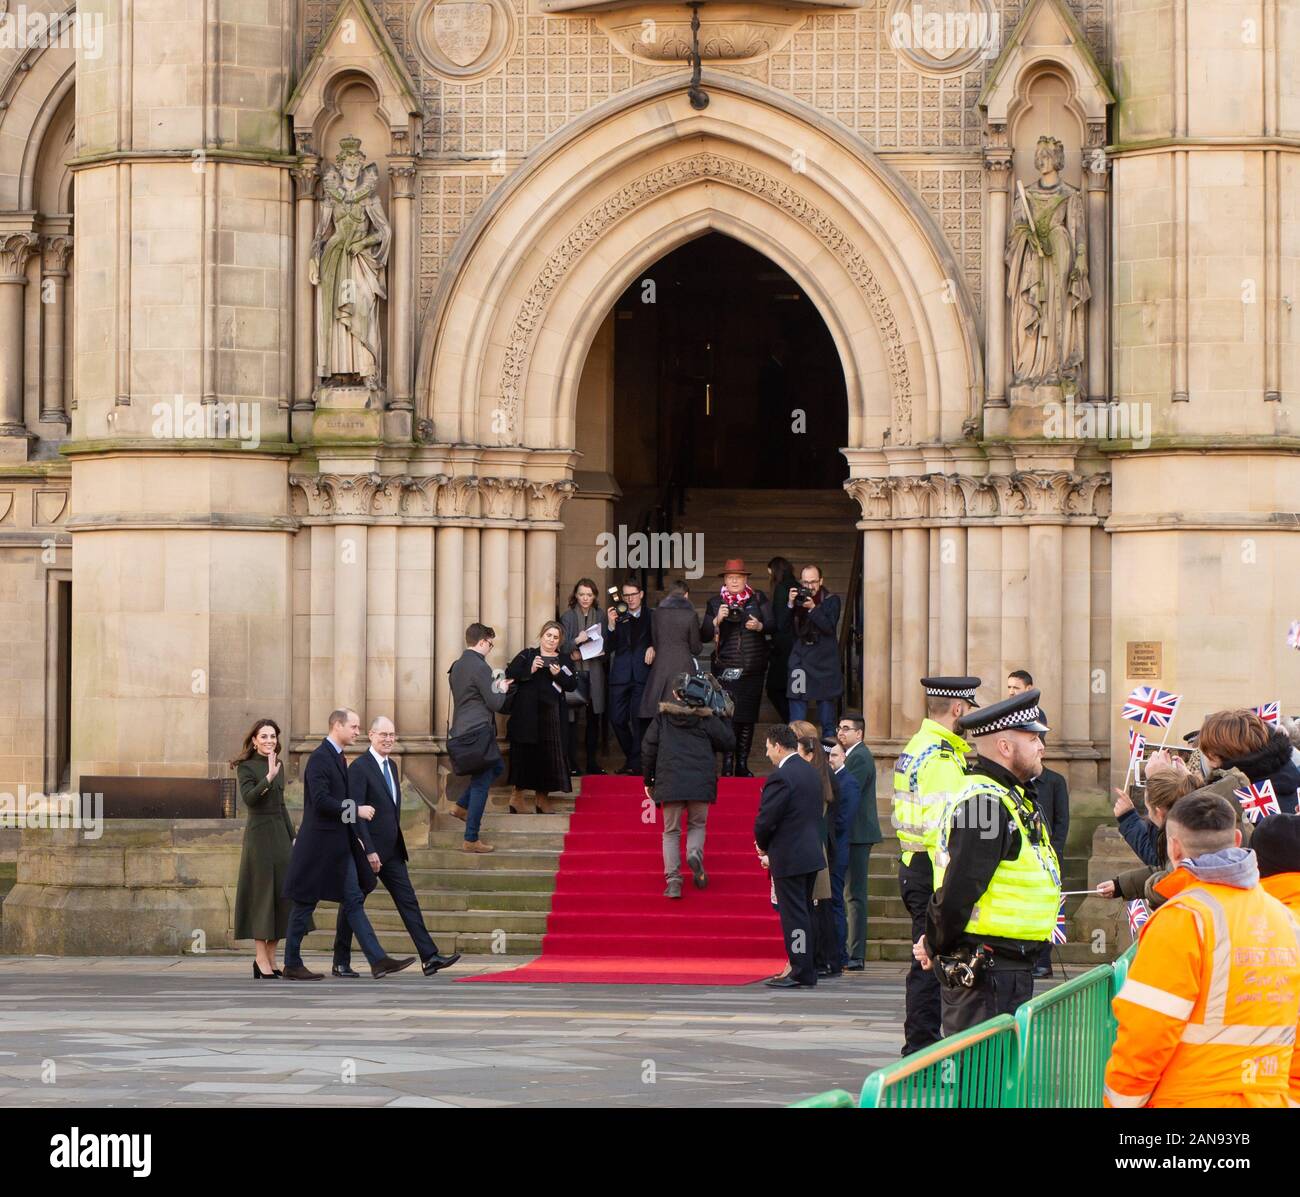 BRADFORD, UK - JANUARY 15, 2020: Prince William and Kate Middleton, the Duchess of Cambridge arrive at Bradford City Hall for Royal Visit Stock Photo